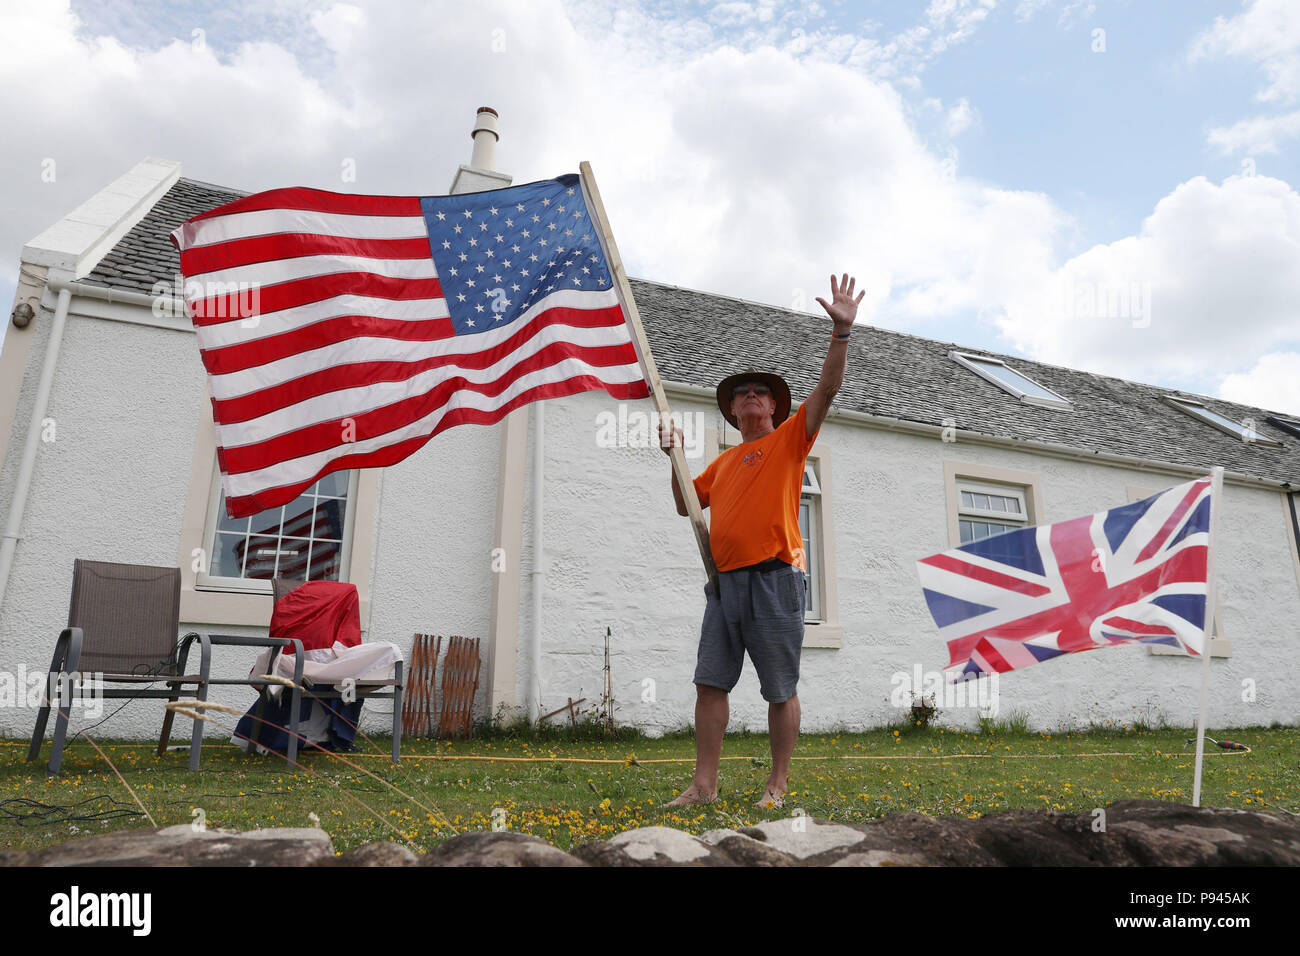 Trump supporter Bill McGibbon outside his cottage near to the Trump Turnberry resort in South Ayrshire, where US President Donald Trump and first lady Melania Trump are spending the weekend at the Trump Turnberry resort in South Ayrshire. Stock Photo